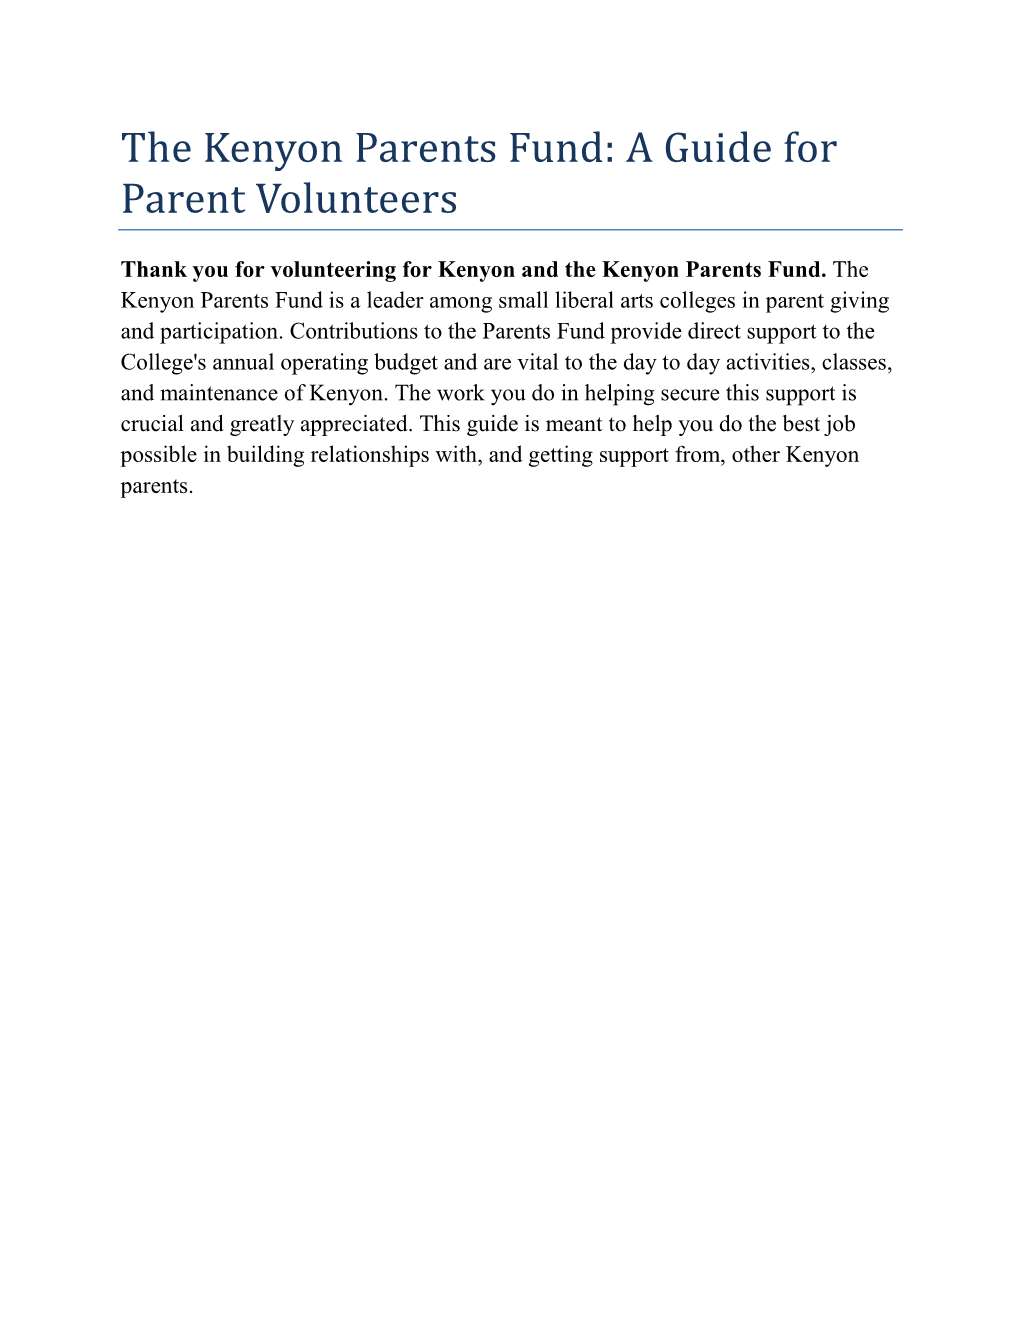 The Kenyon Parents Fund: a Guide for Parent Volunteers